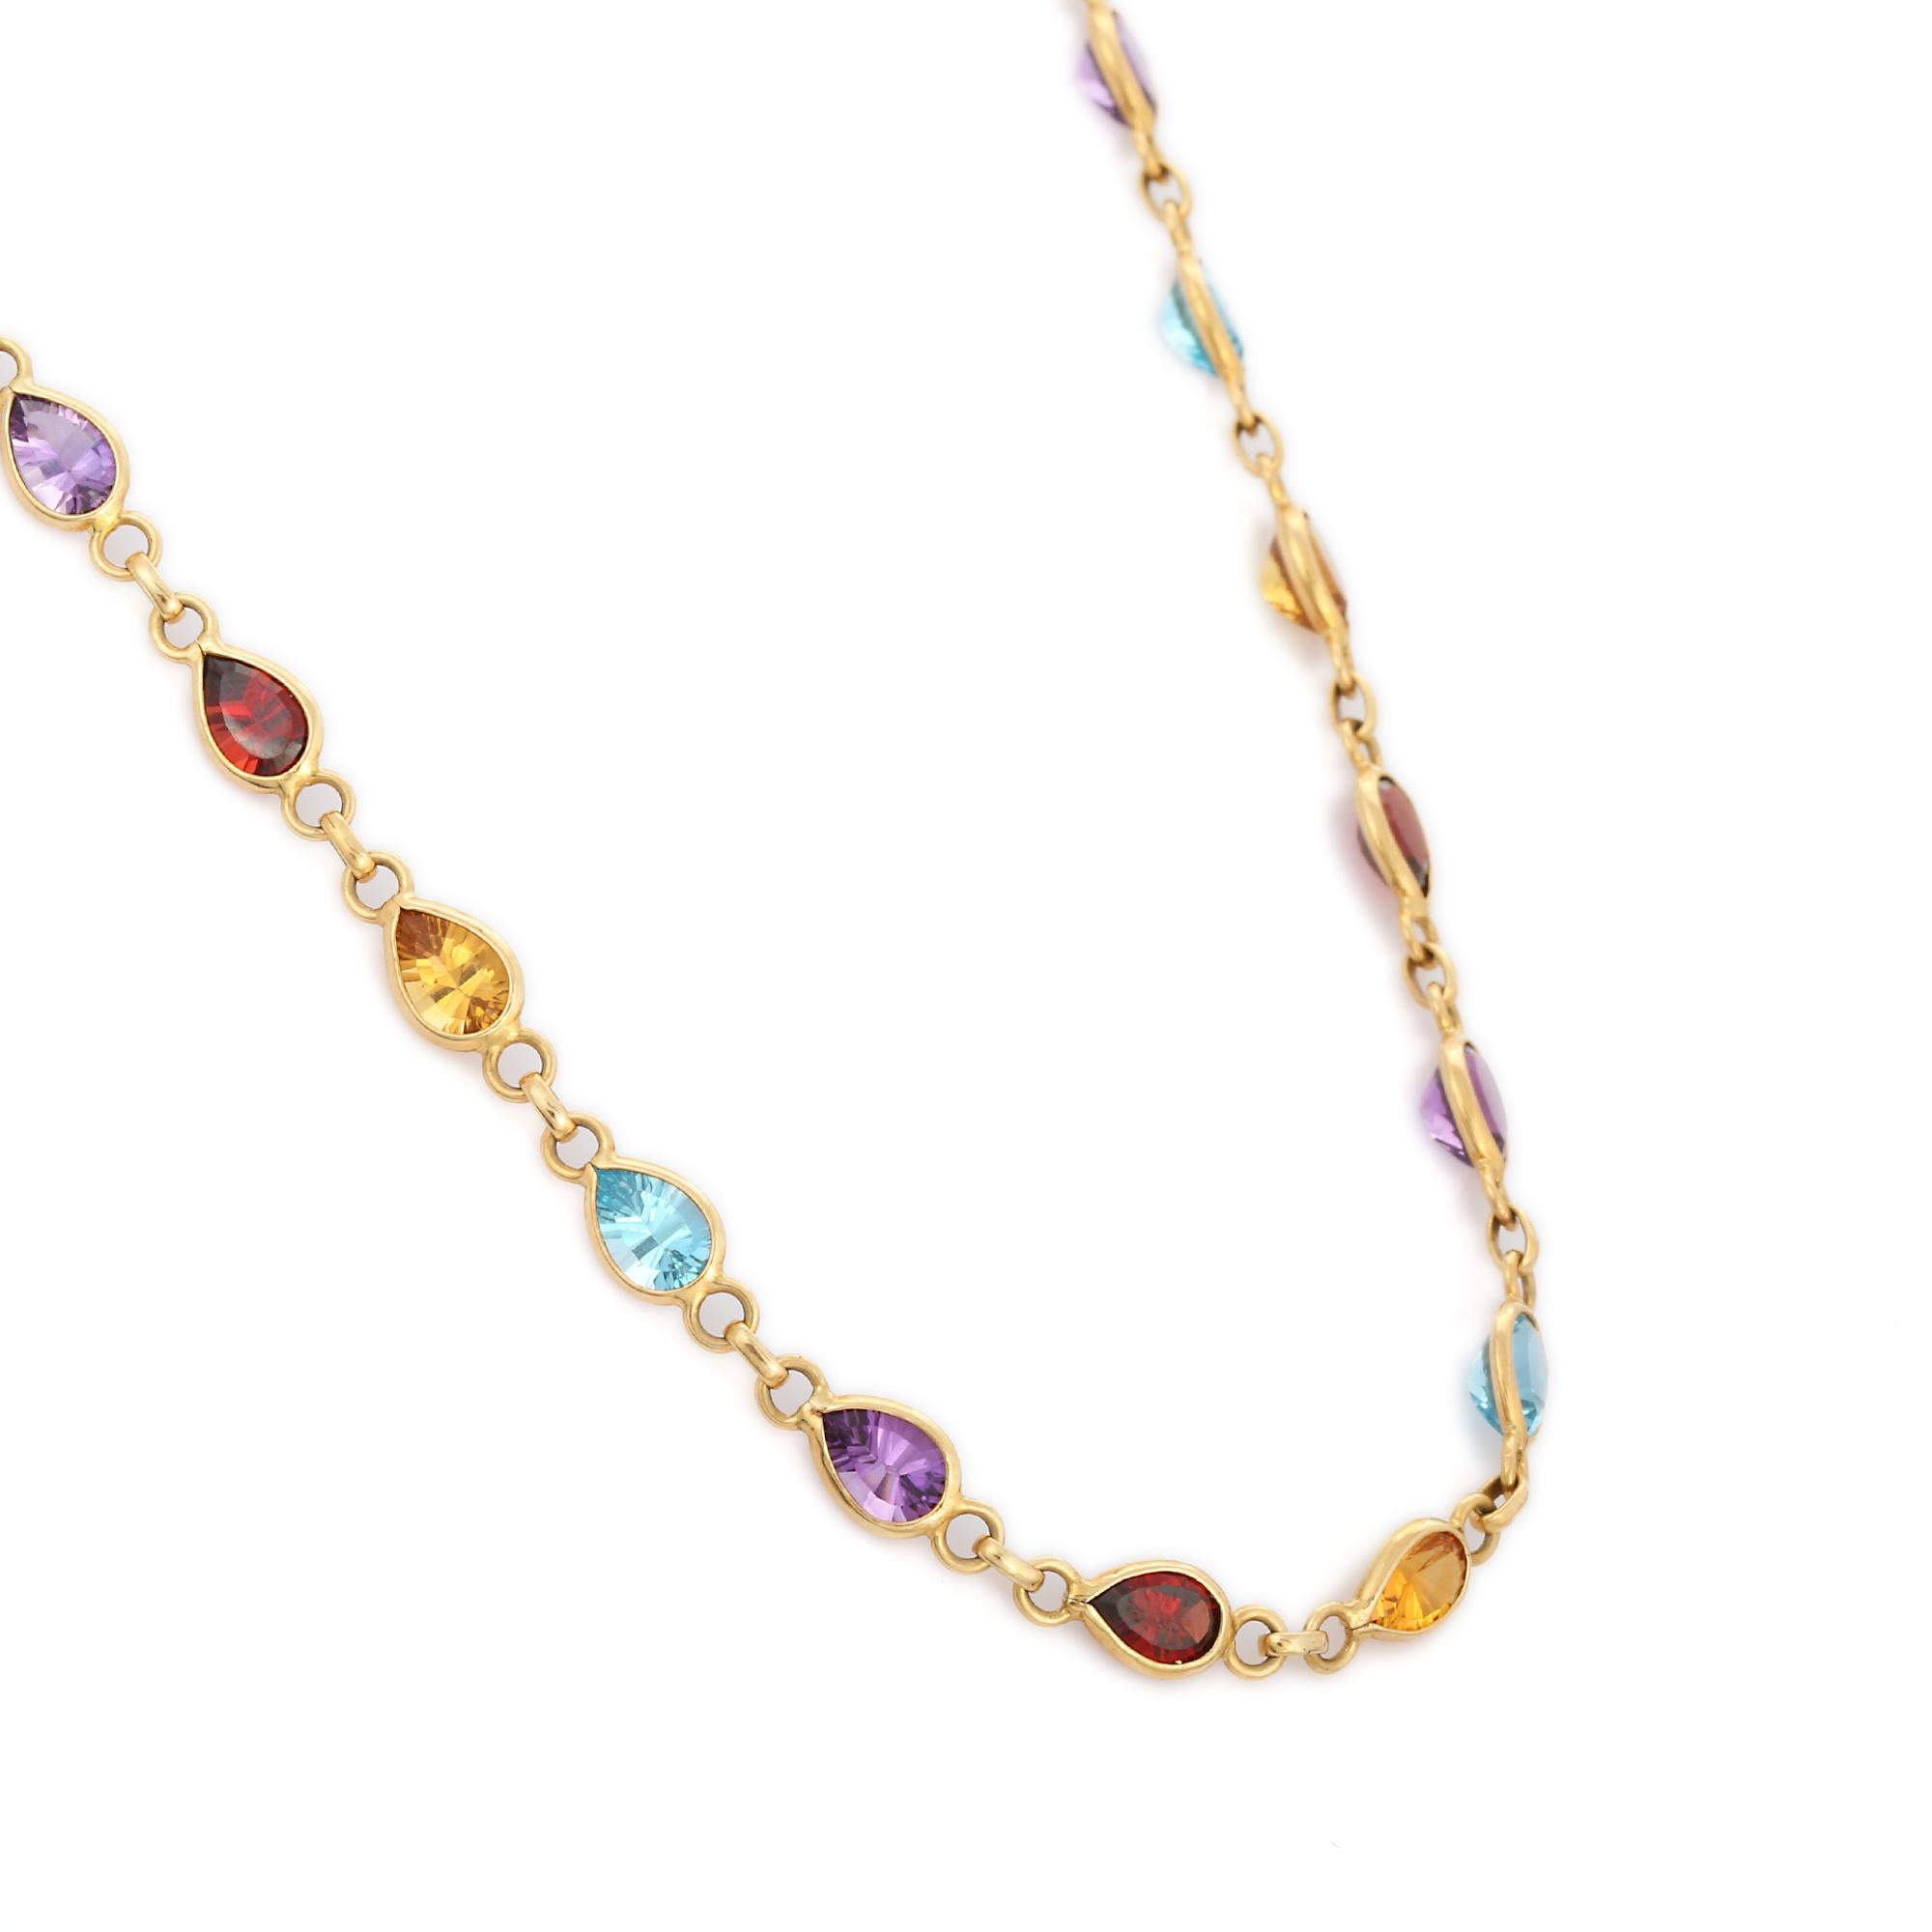 Multi Gemstone Necklace in 18K Gold studded with pear cut semi precious multi gemstone.
Accessorize your look with this elegant semi precious multi gemstone linked necklace. This stunning piece of jewelry instantly elevates a casual look or dressy